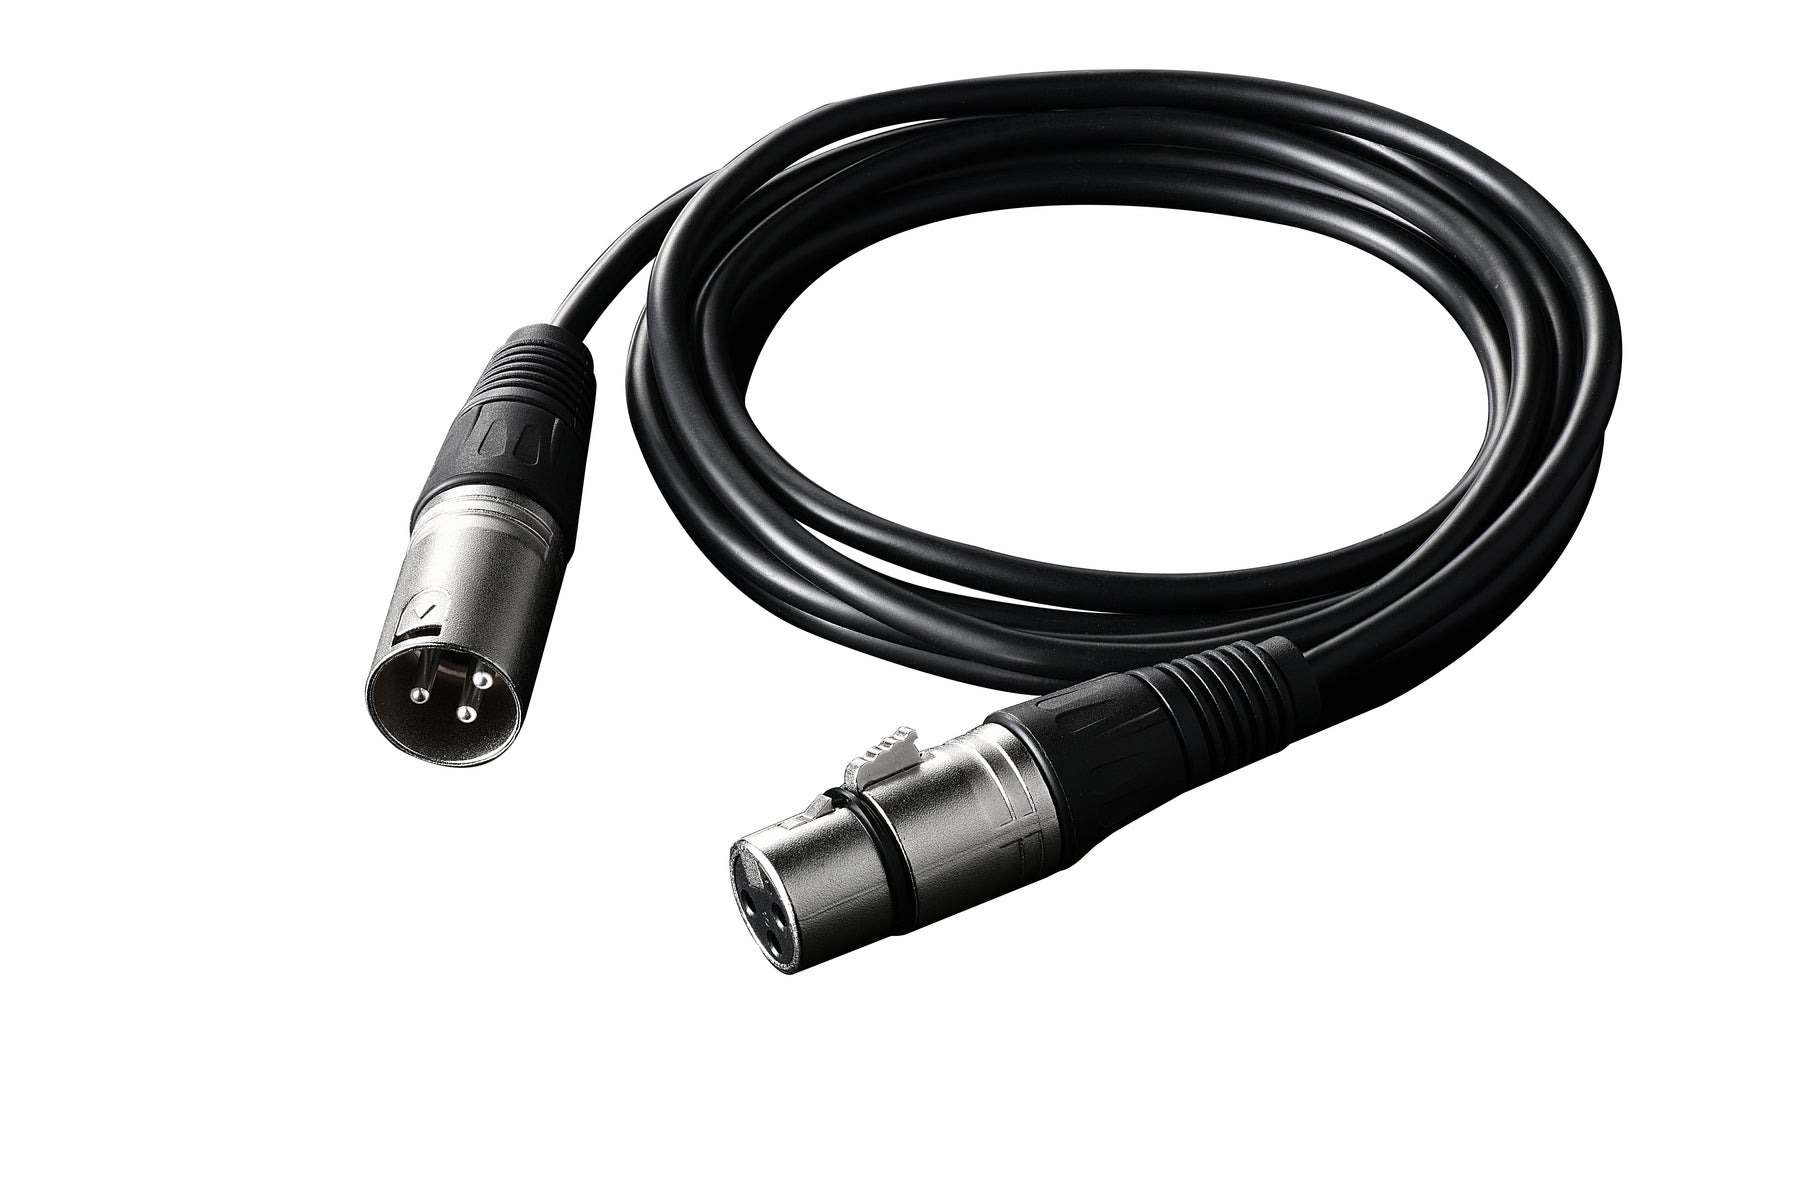 IBRA XLR Mic Cable Premium Quality Pro Microphone Lead | Balanced Male XLR to Female XLR | 4 Metre | Clearer Sound for PA Systems, Studio Recording, Mixers, Amplification & Speakers - BLACK